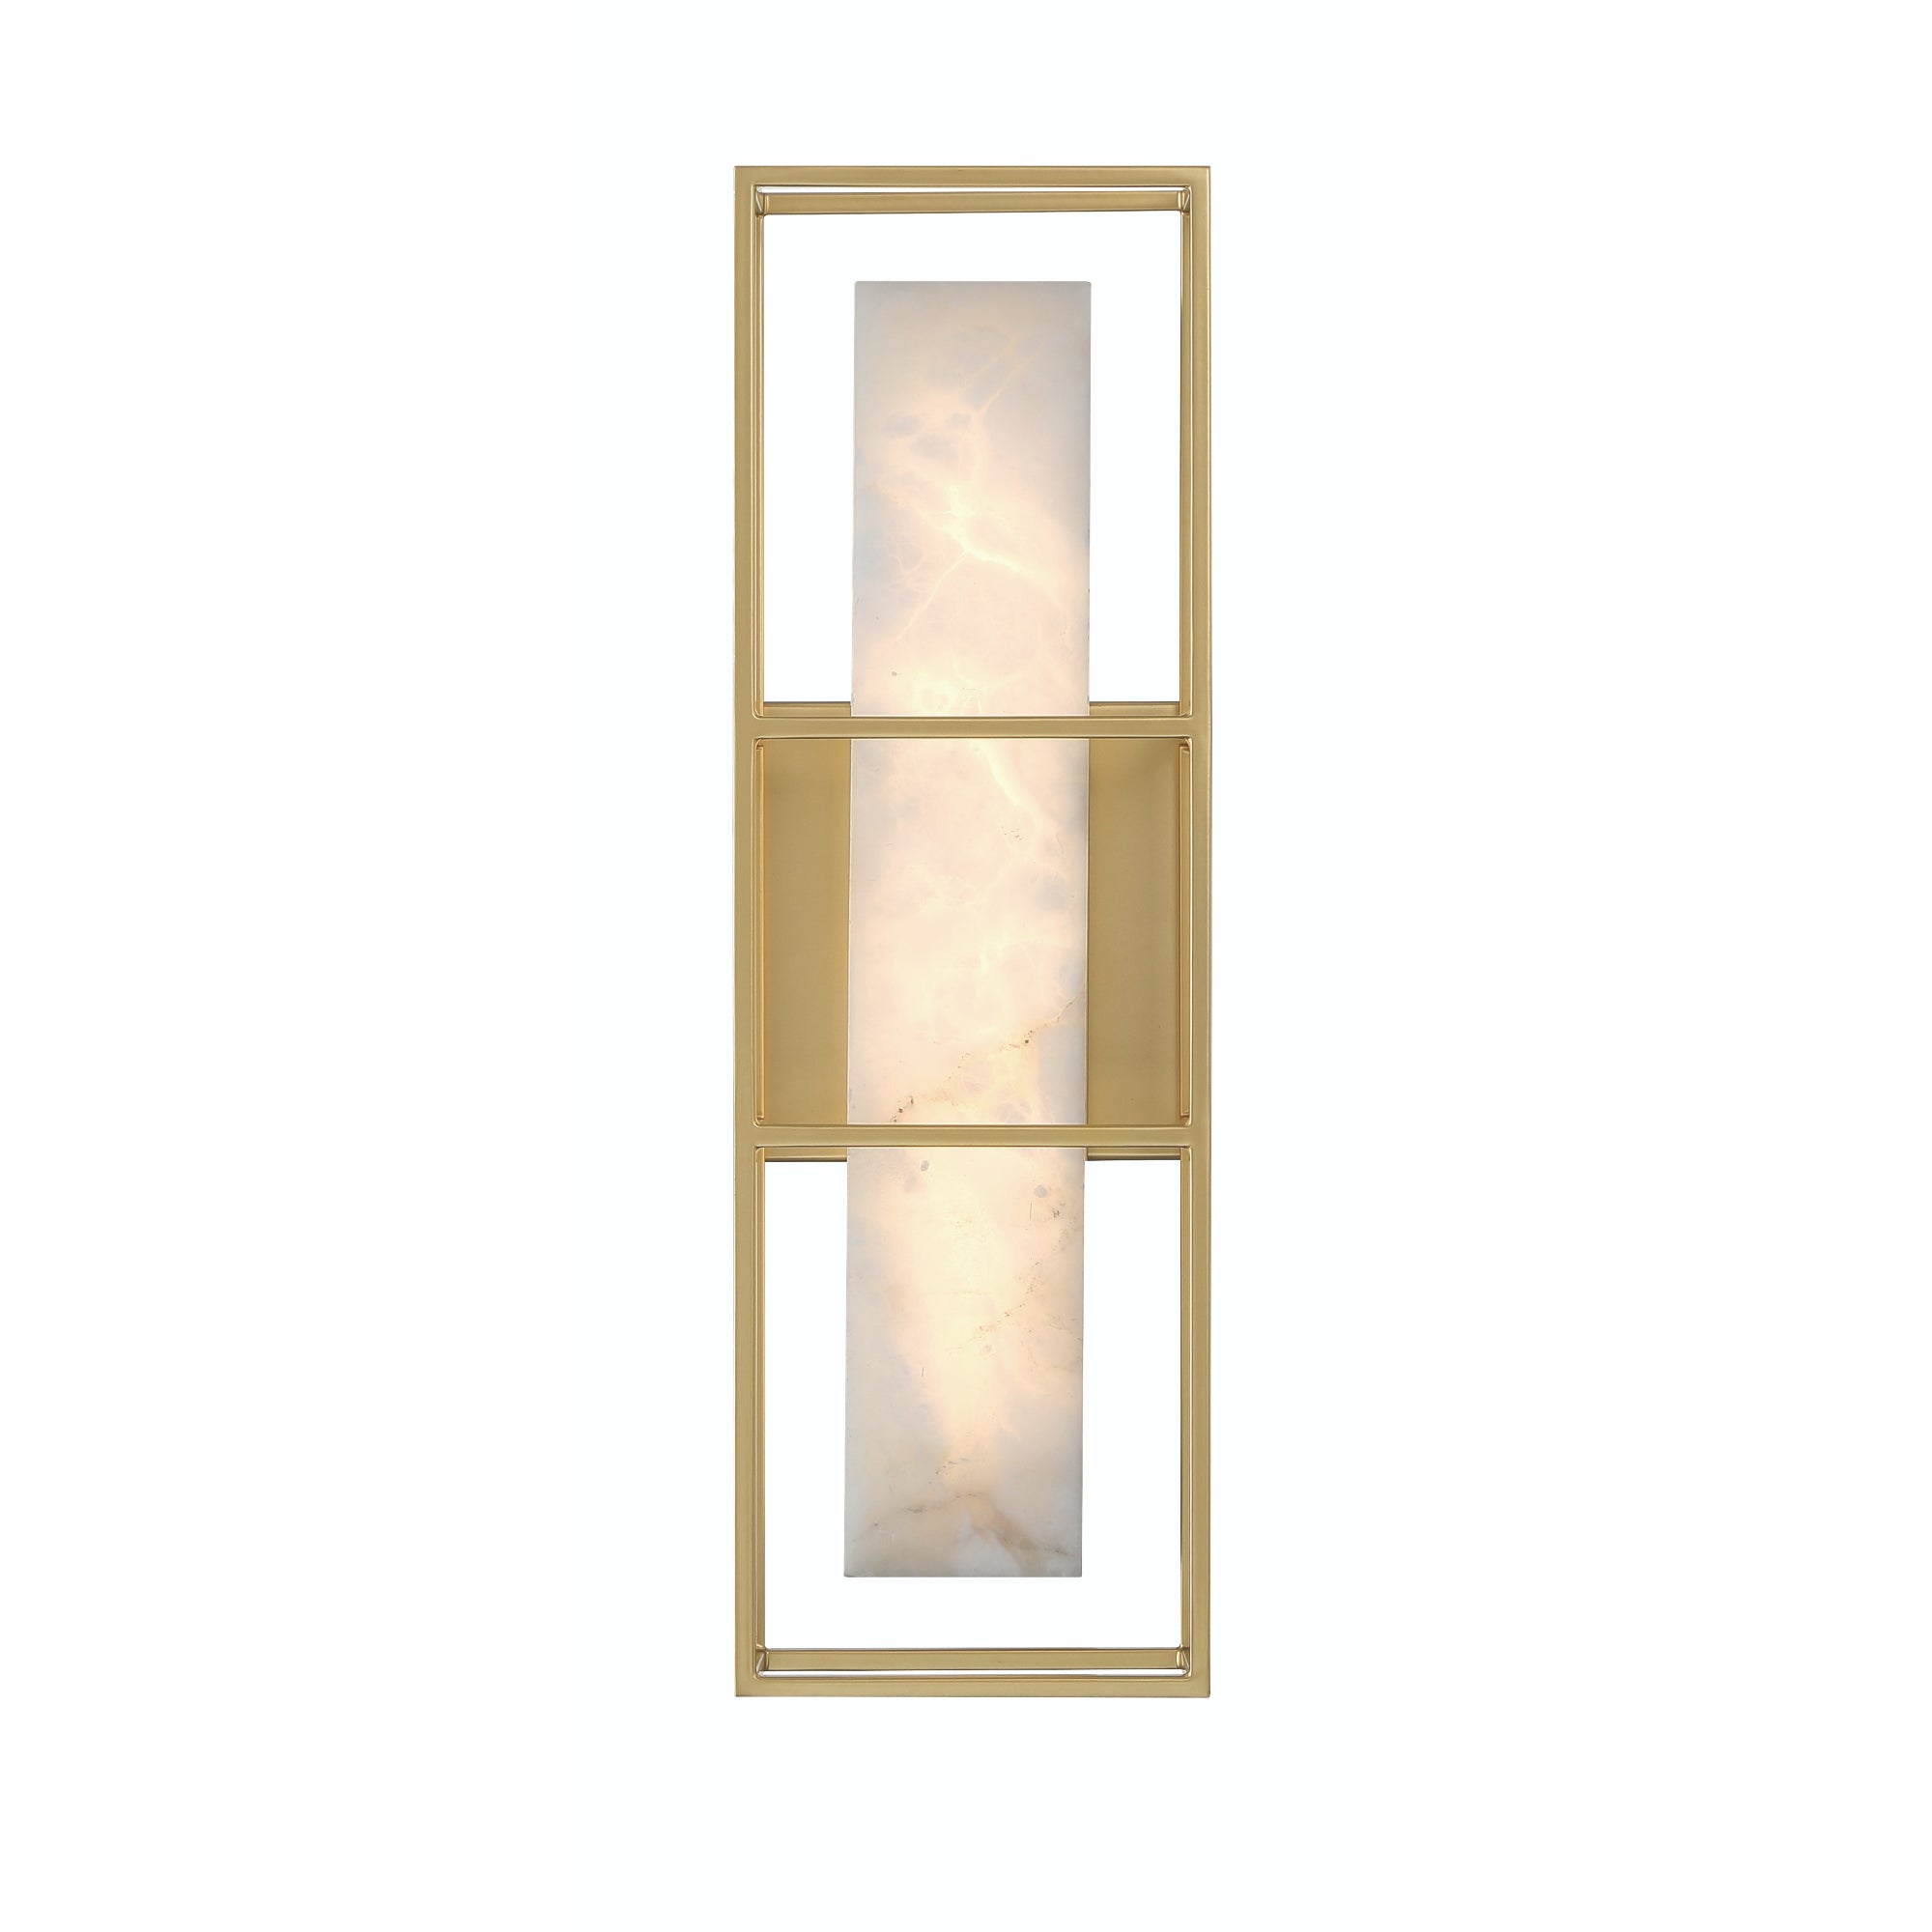 Eurofase Canada - 46837-028 - LED Outdoor Wall Sconce - Blakley - Gold